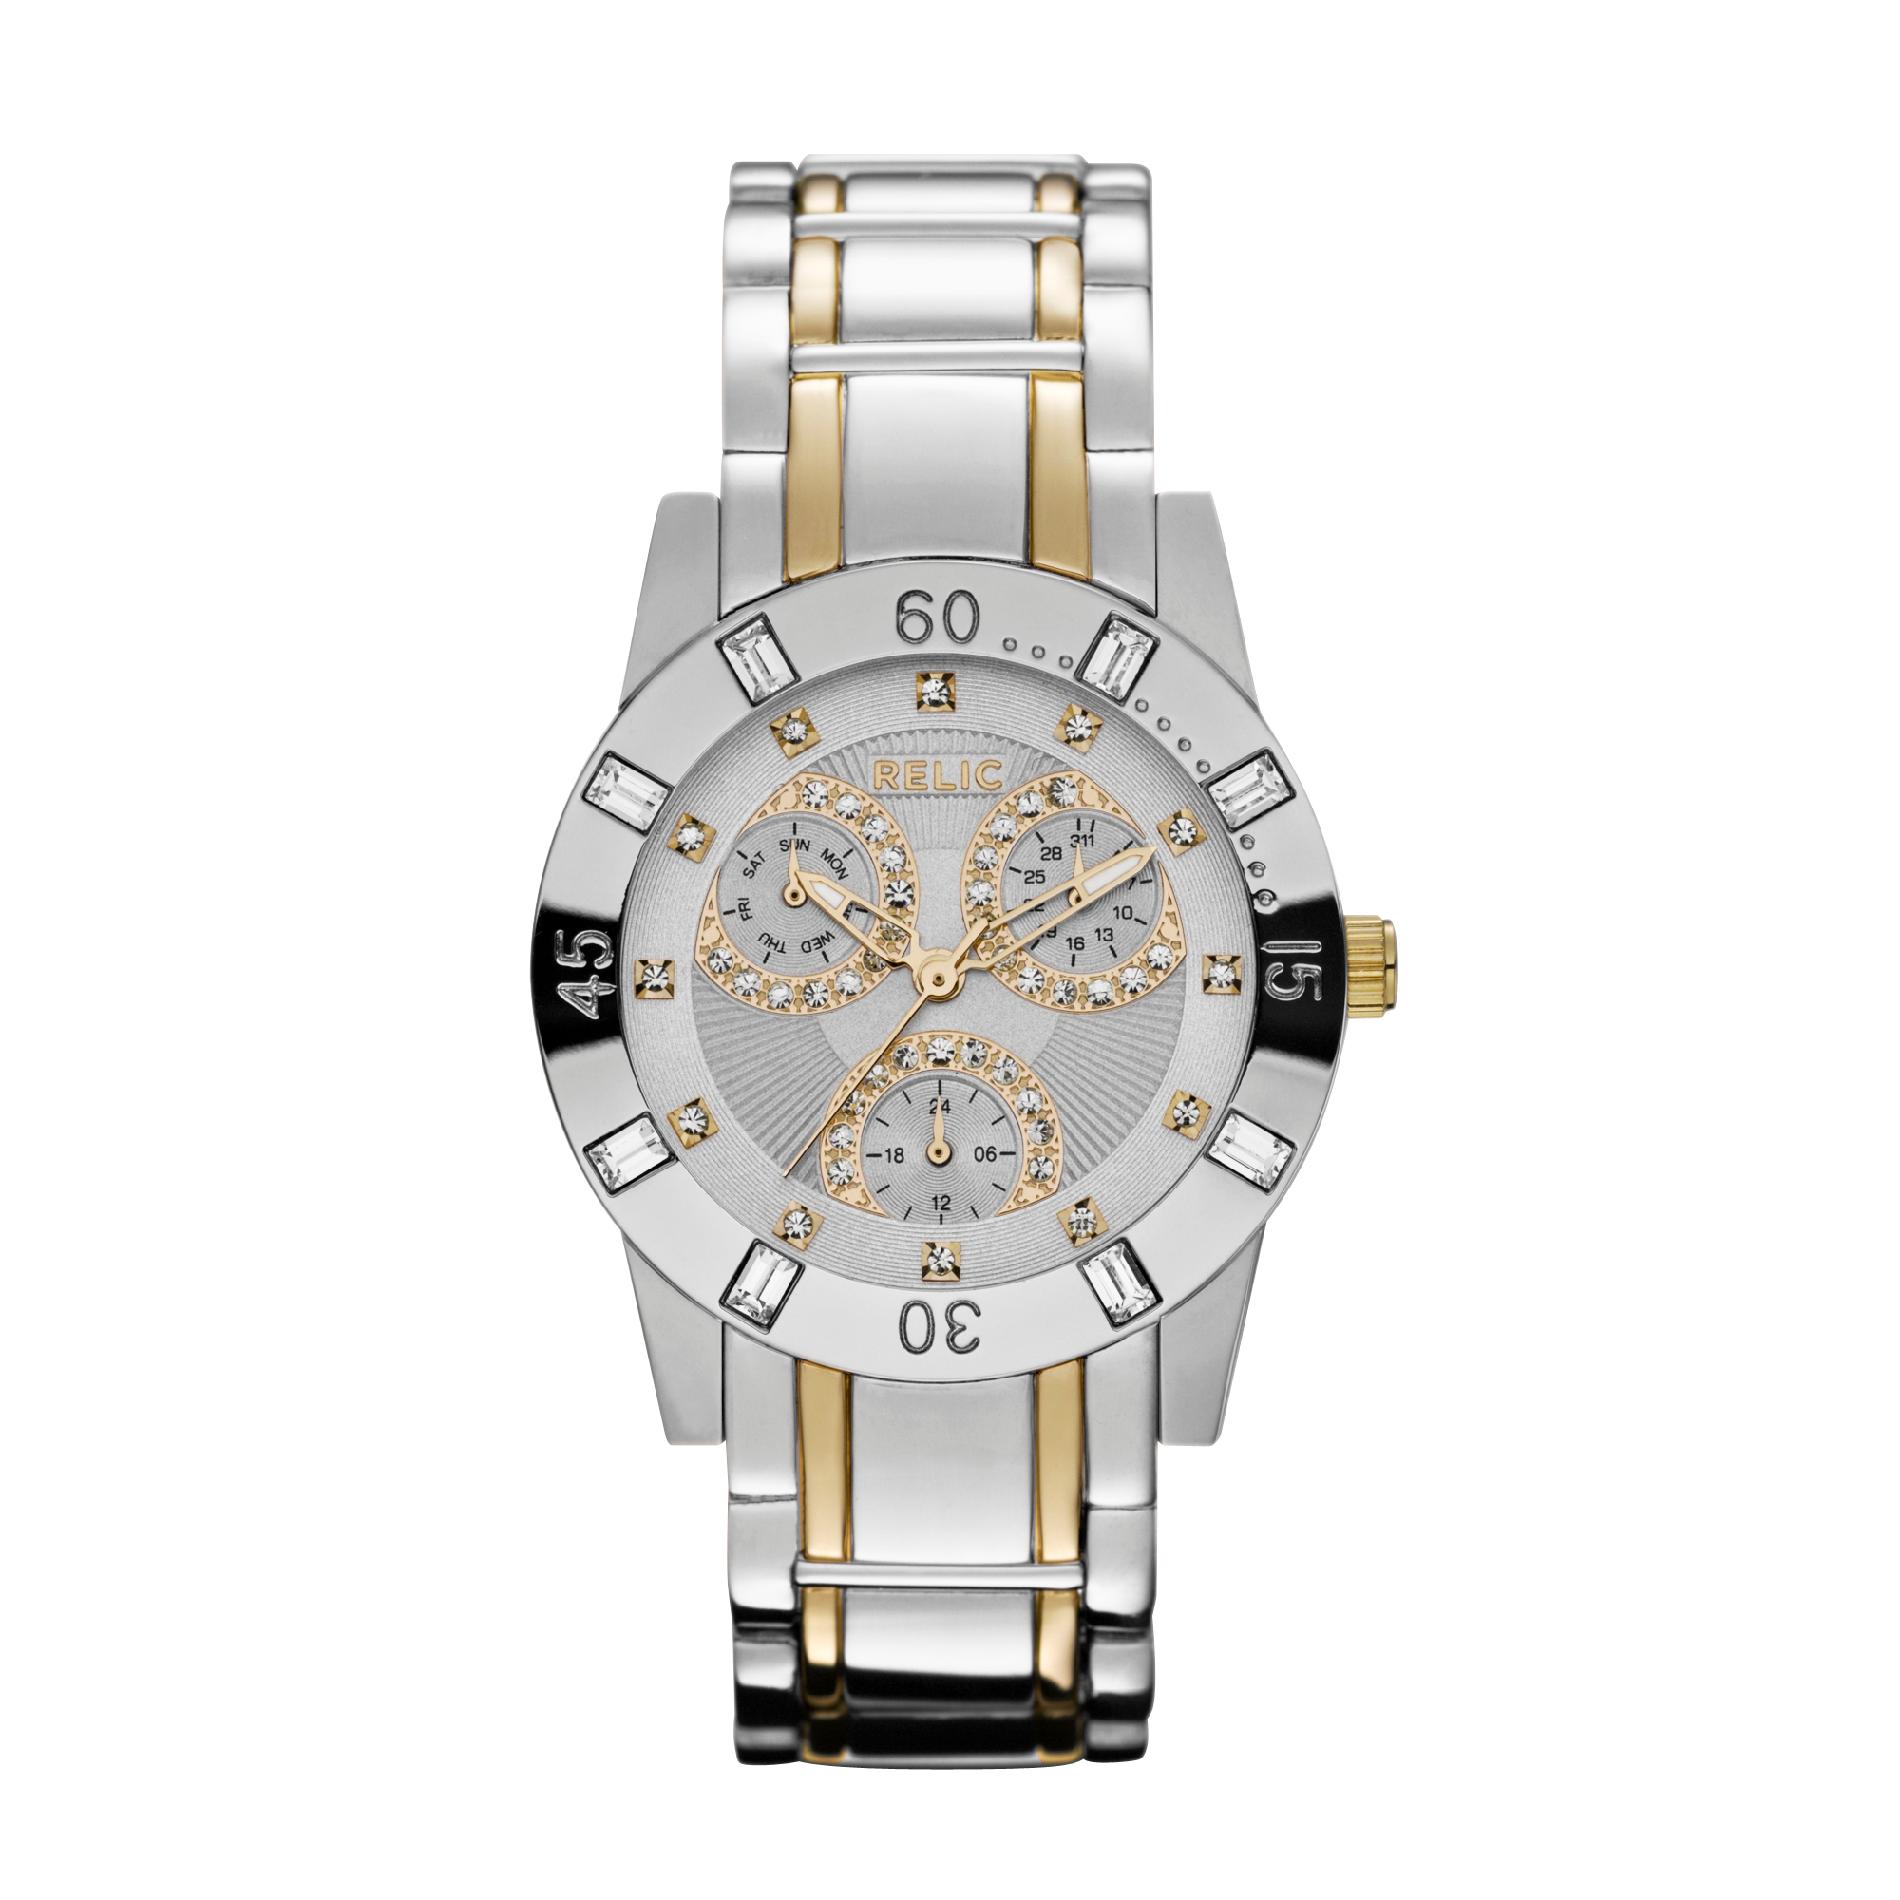 UPC 723765264820 product image for Ladies' Two-Tone Bracelet Watch with Round Gold-Tone Multi-Dial and Crystal Acce | upcitemdb.com